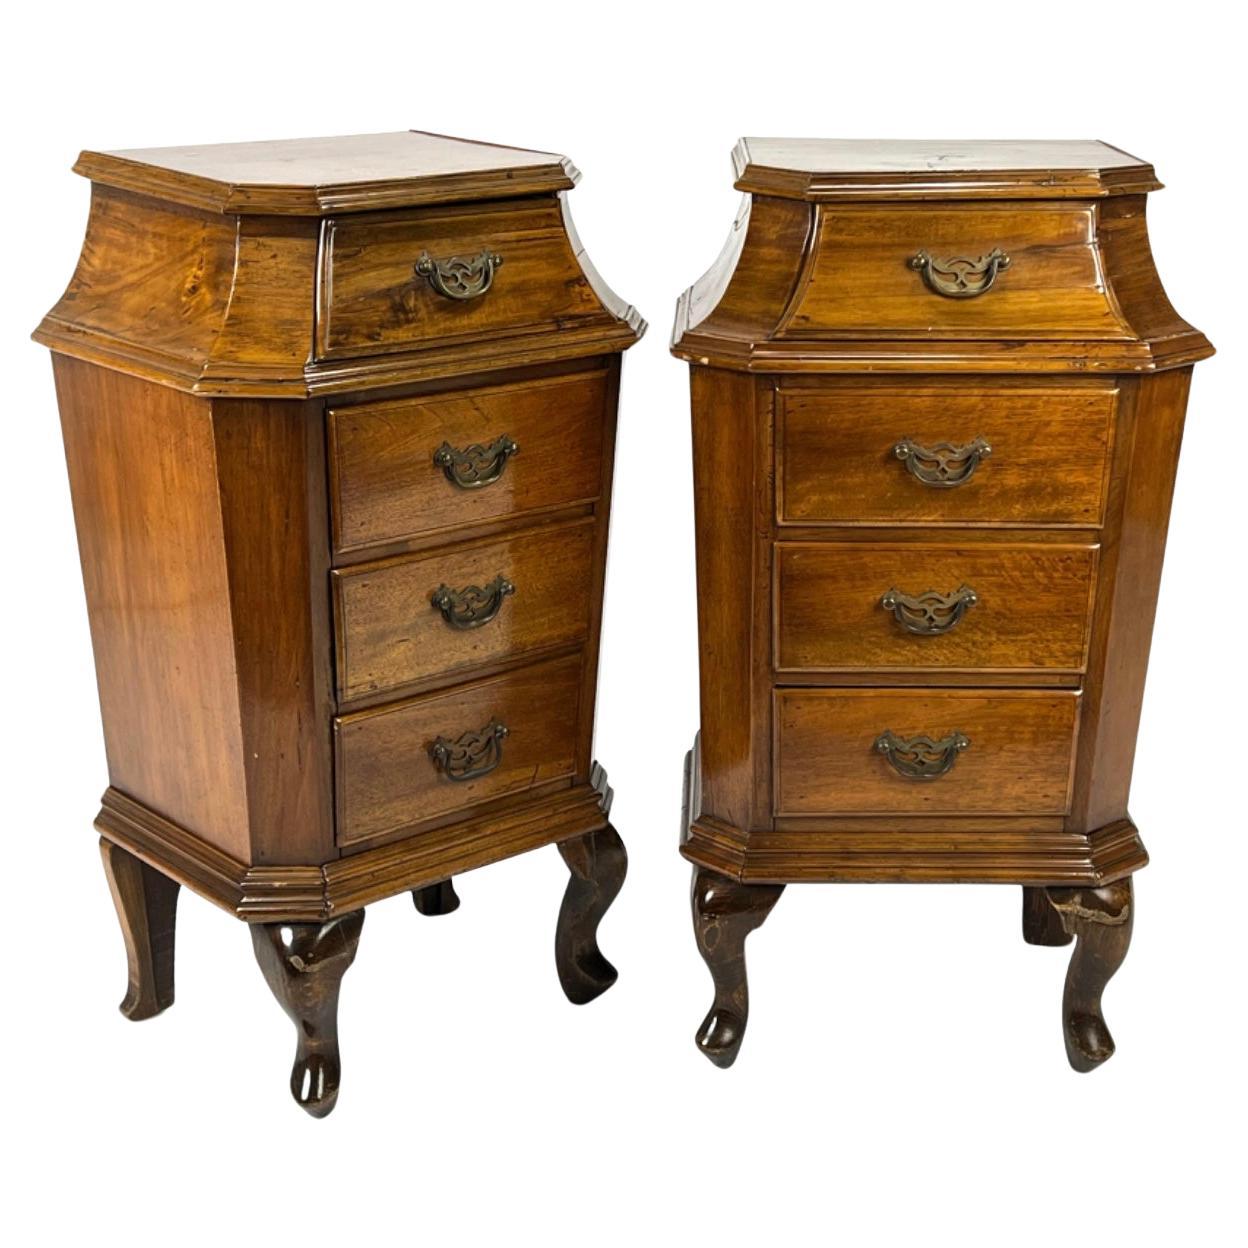 Pair Of Bedside Tables - Nightstands For Sale